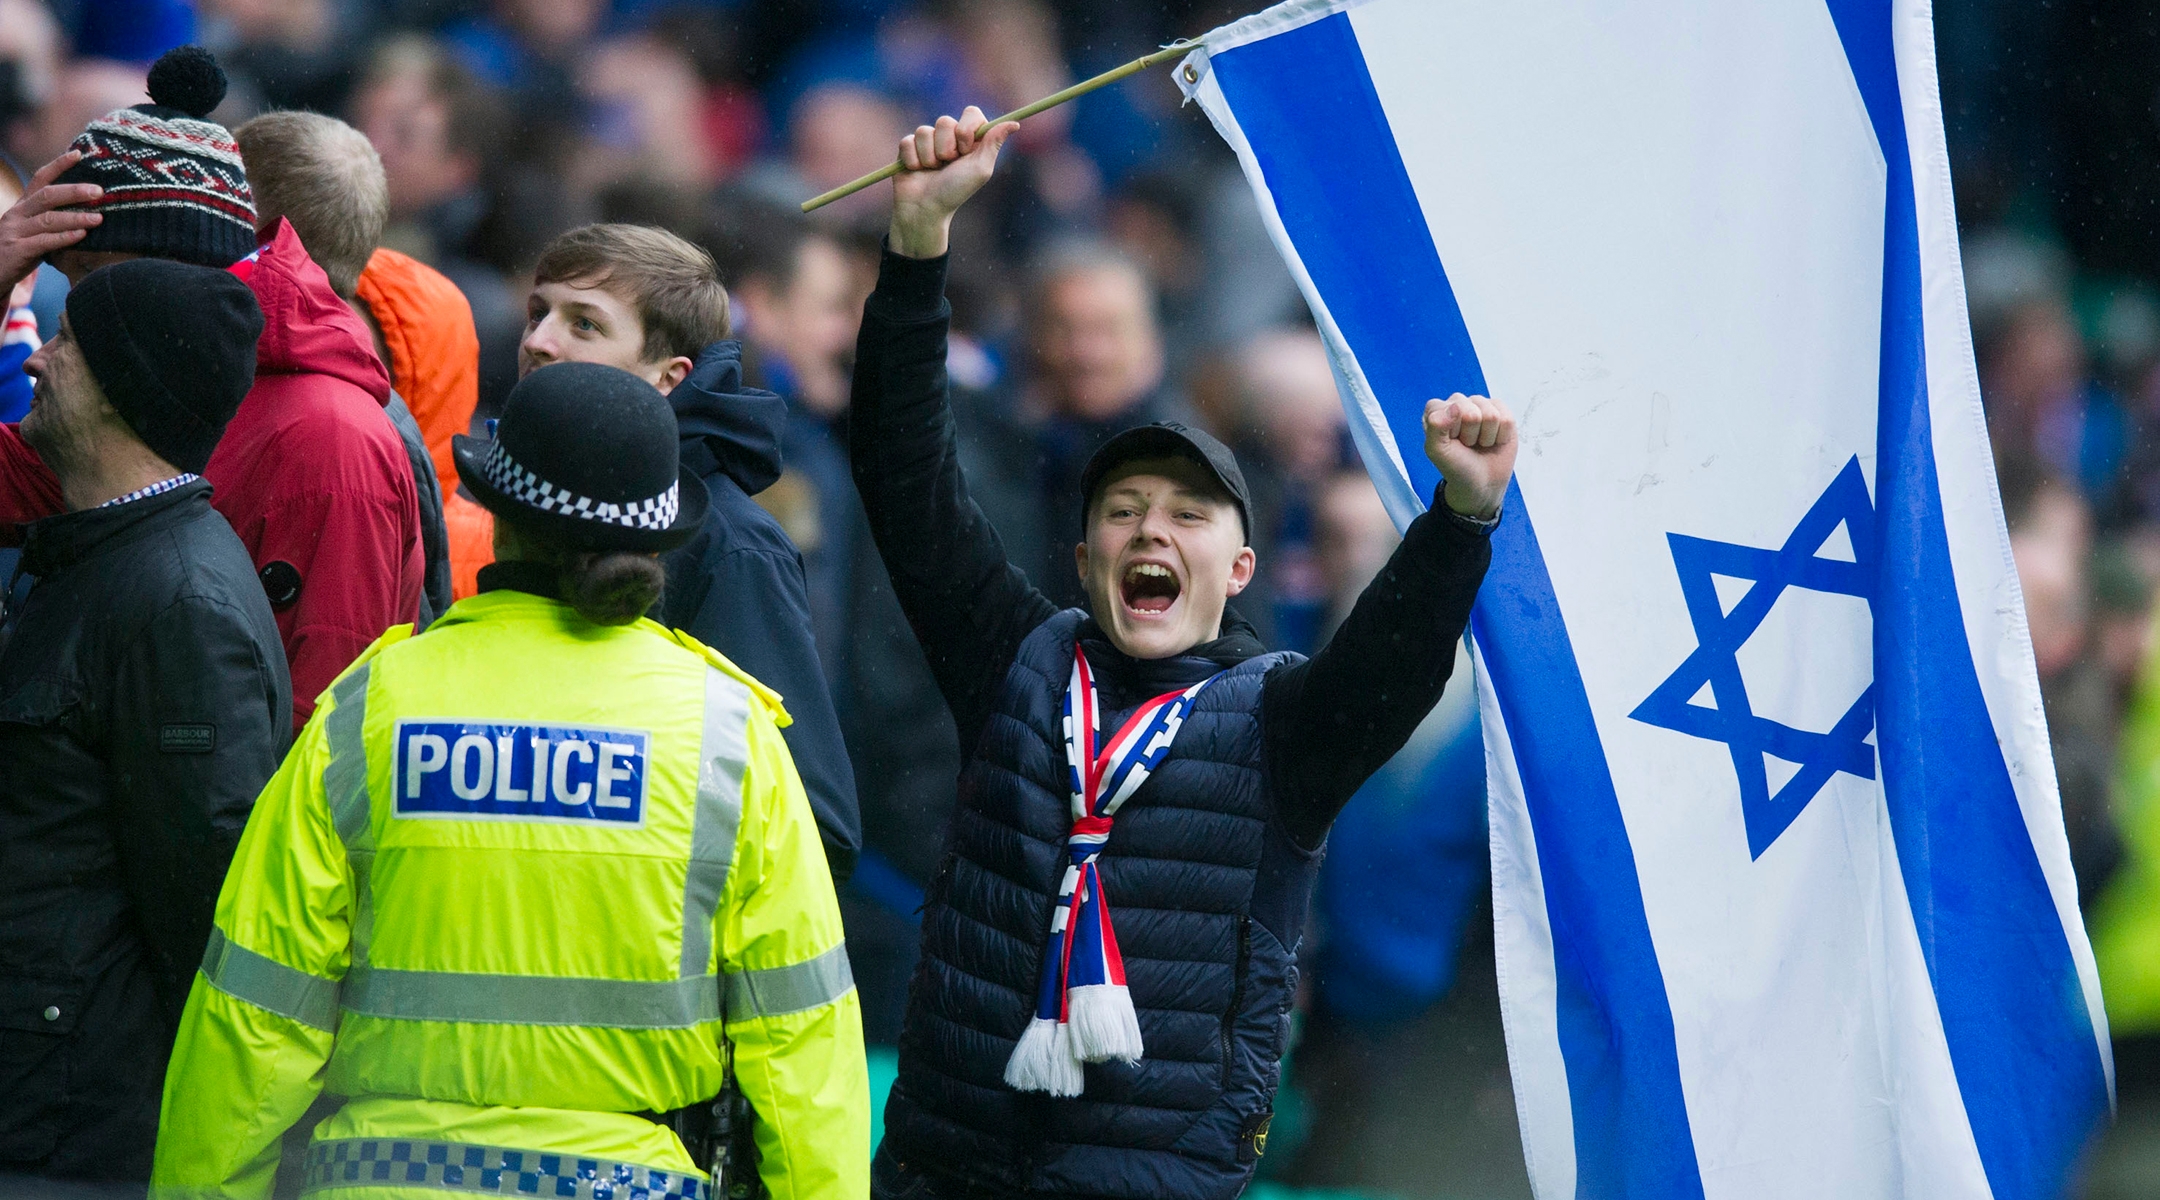 A Rangers FC fan celebrates while holding an Israeli flag during a match against Celtic FC in 2017. (Ross MacDonald/SNS Group via Getty Images)